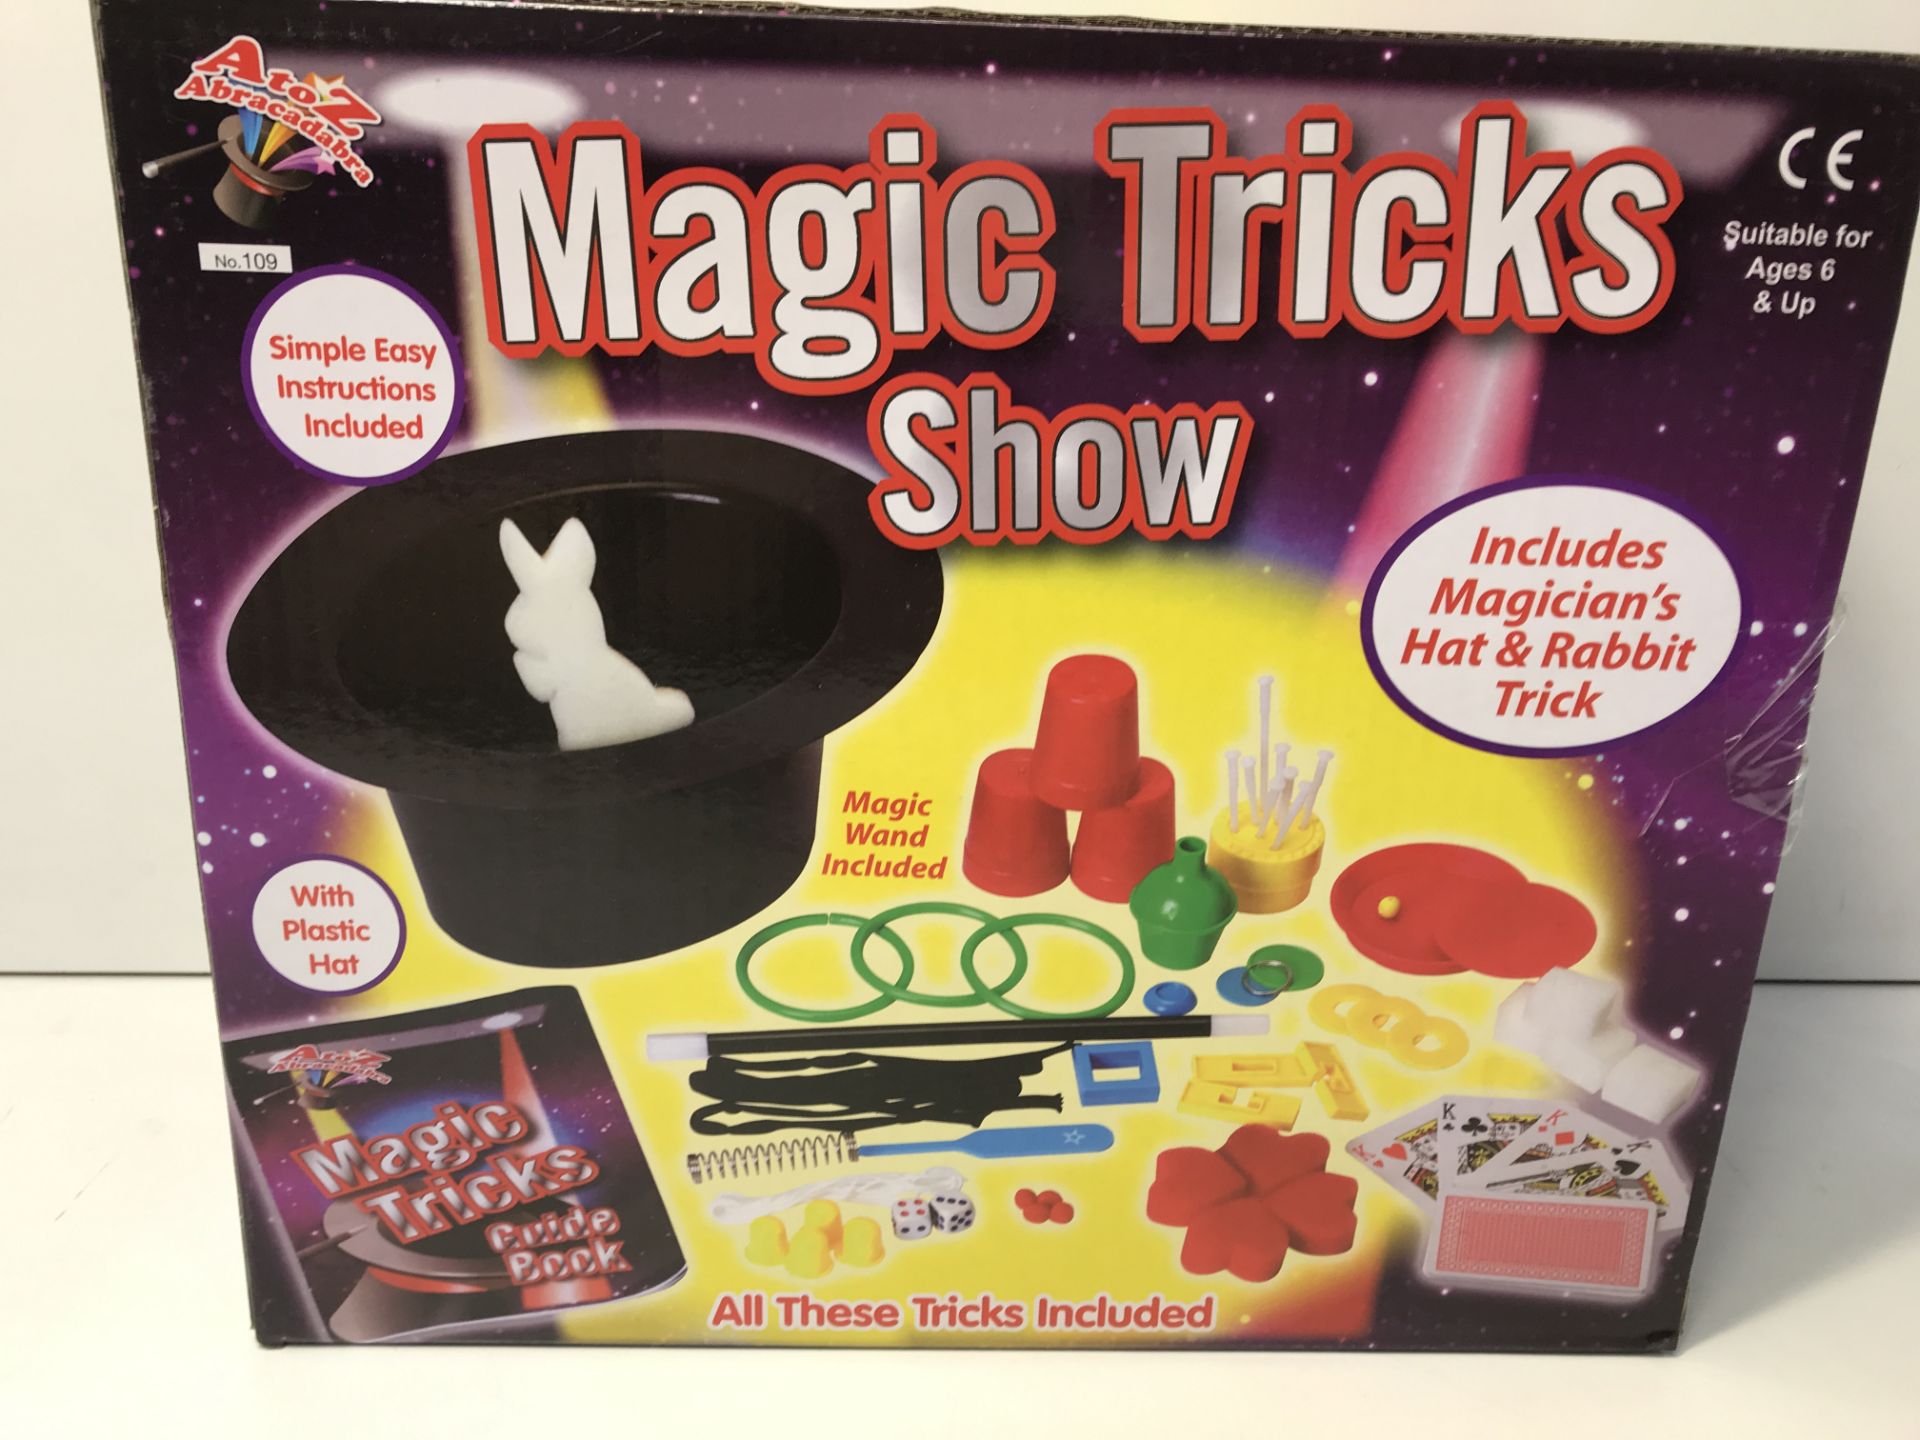 6 x Magic Trick Show Set With Hat |5012866001096 - Image 4 of 5